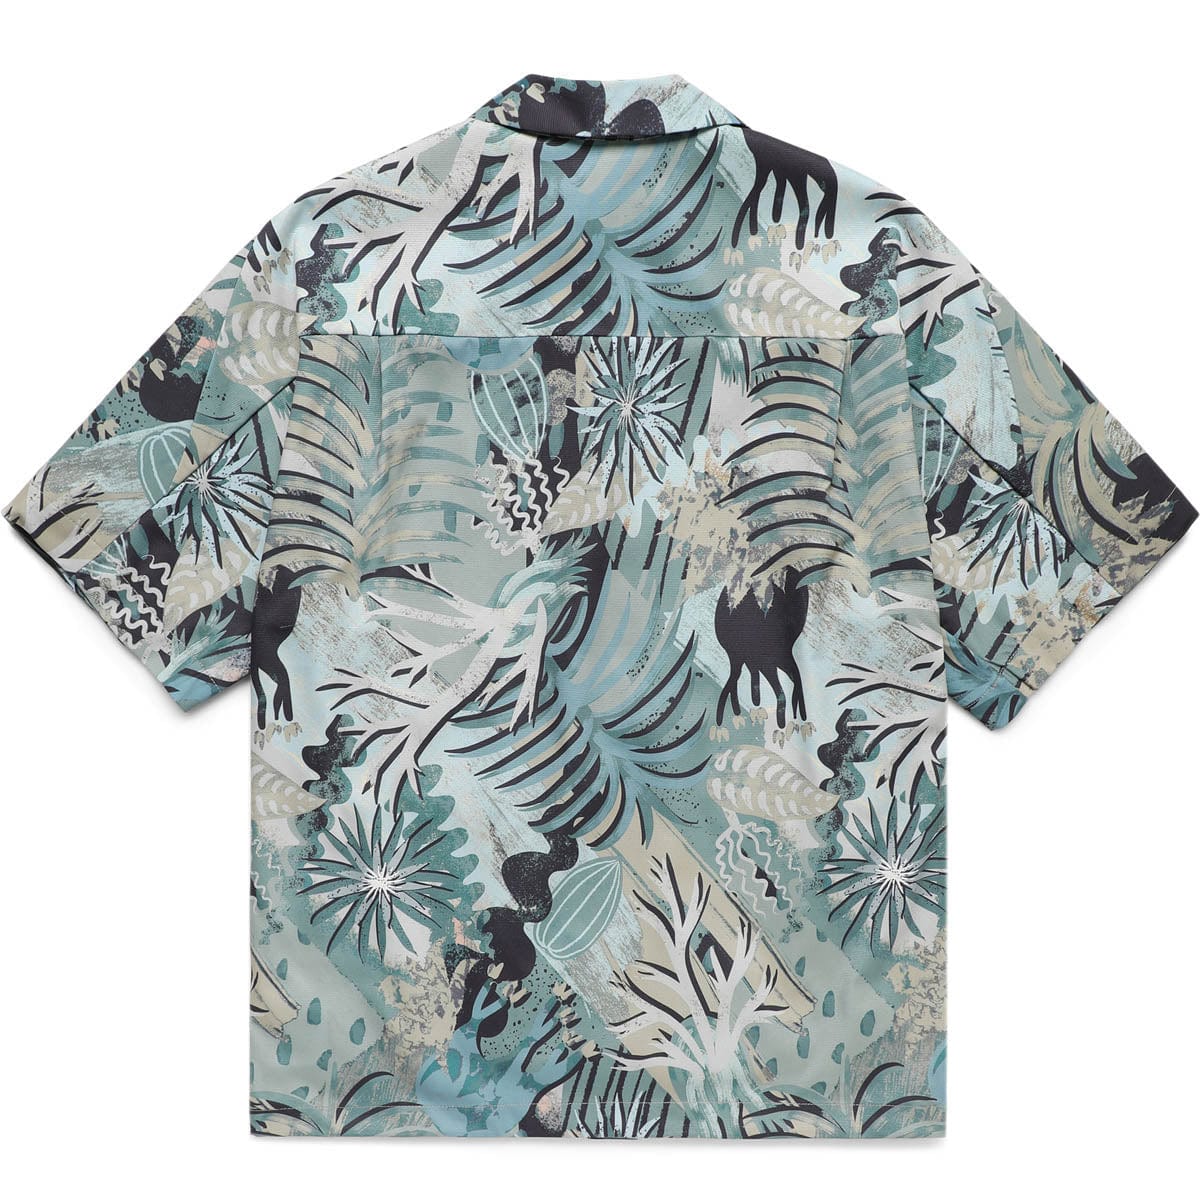 PRINTED BREATHABLE QUICK DRY SHIRT